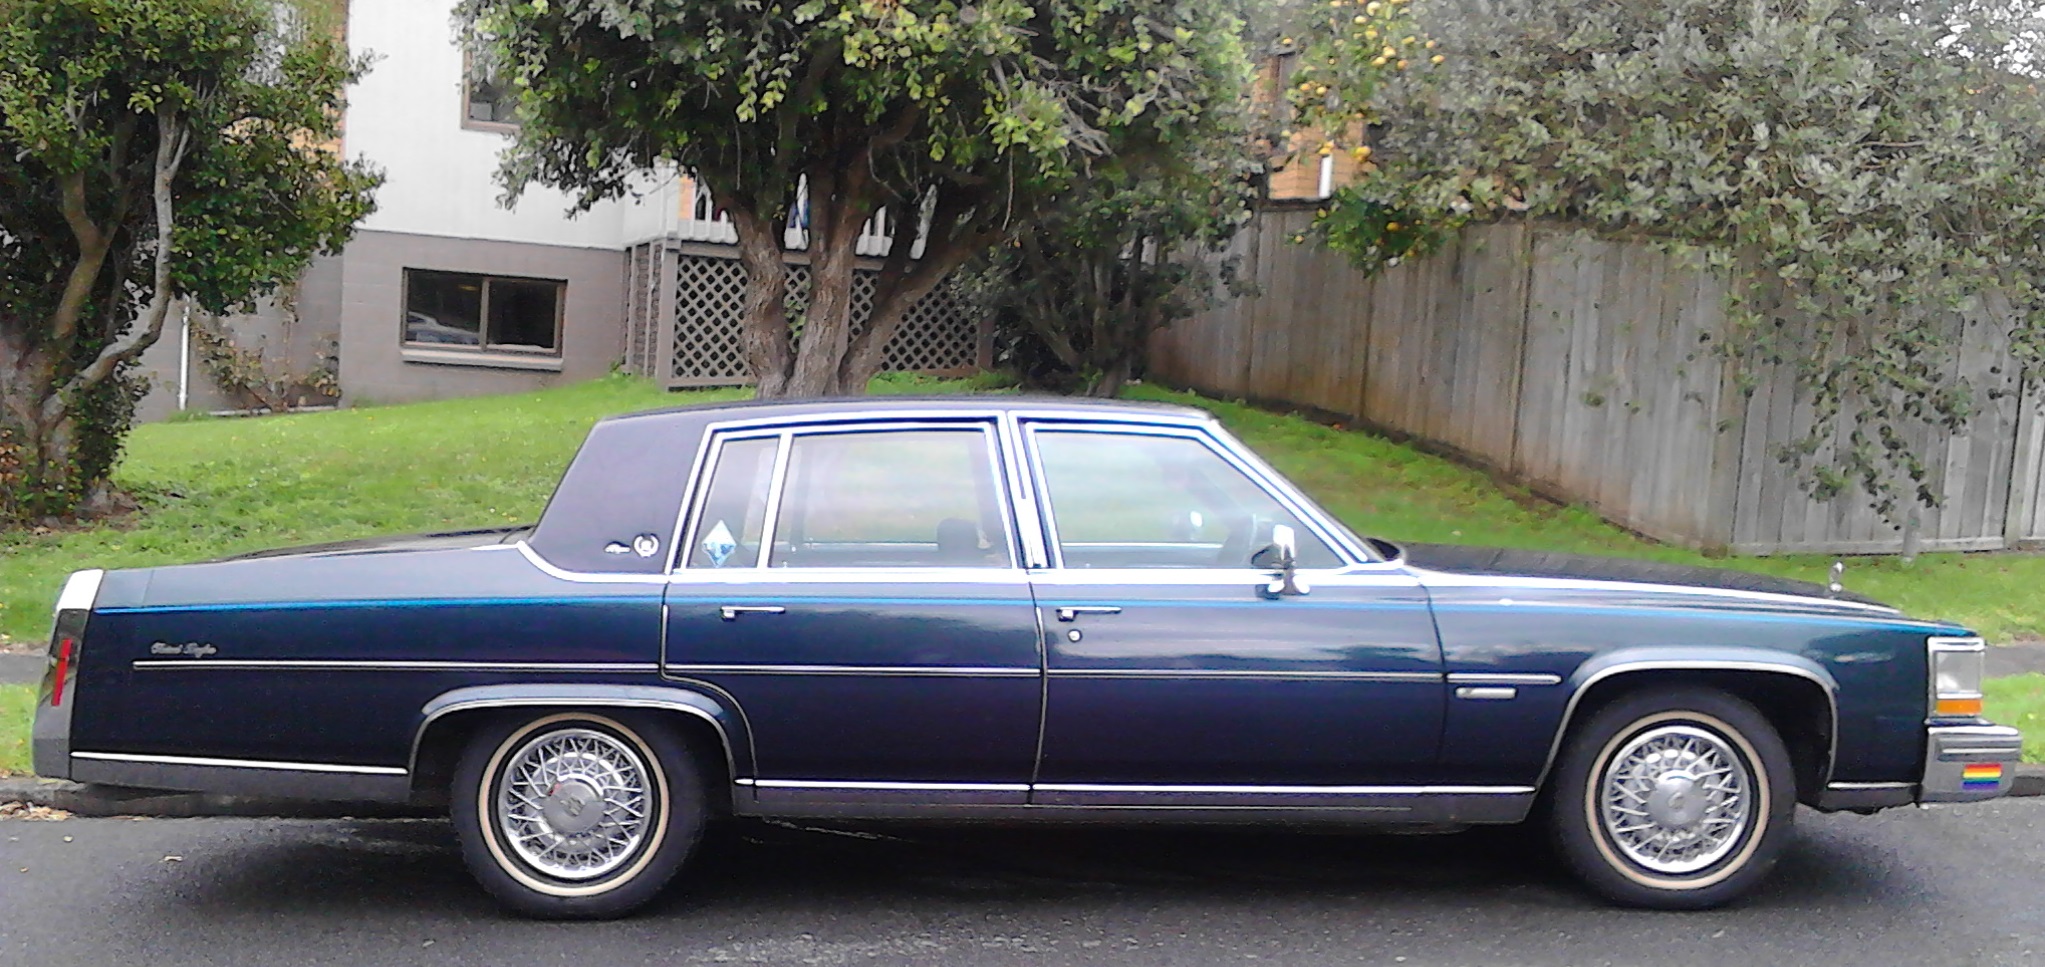 Coal 1987 Cadillac Brougham From A Curbside Classic To My